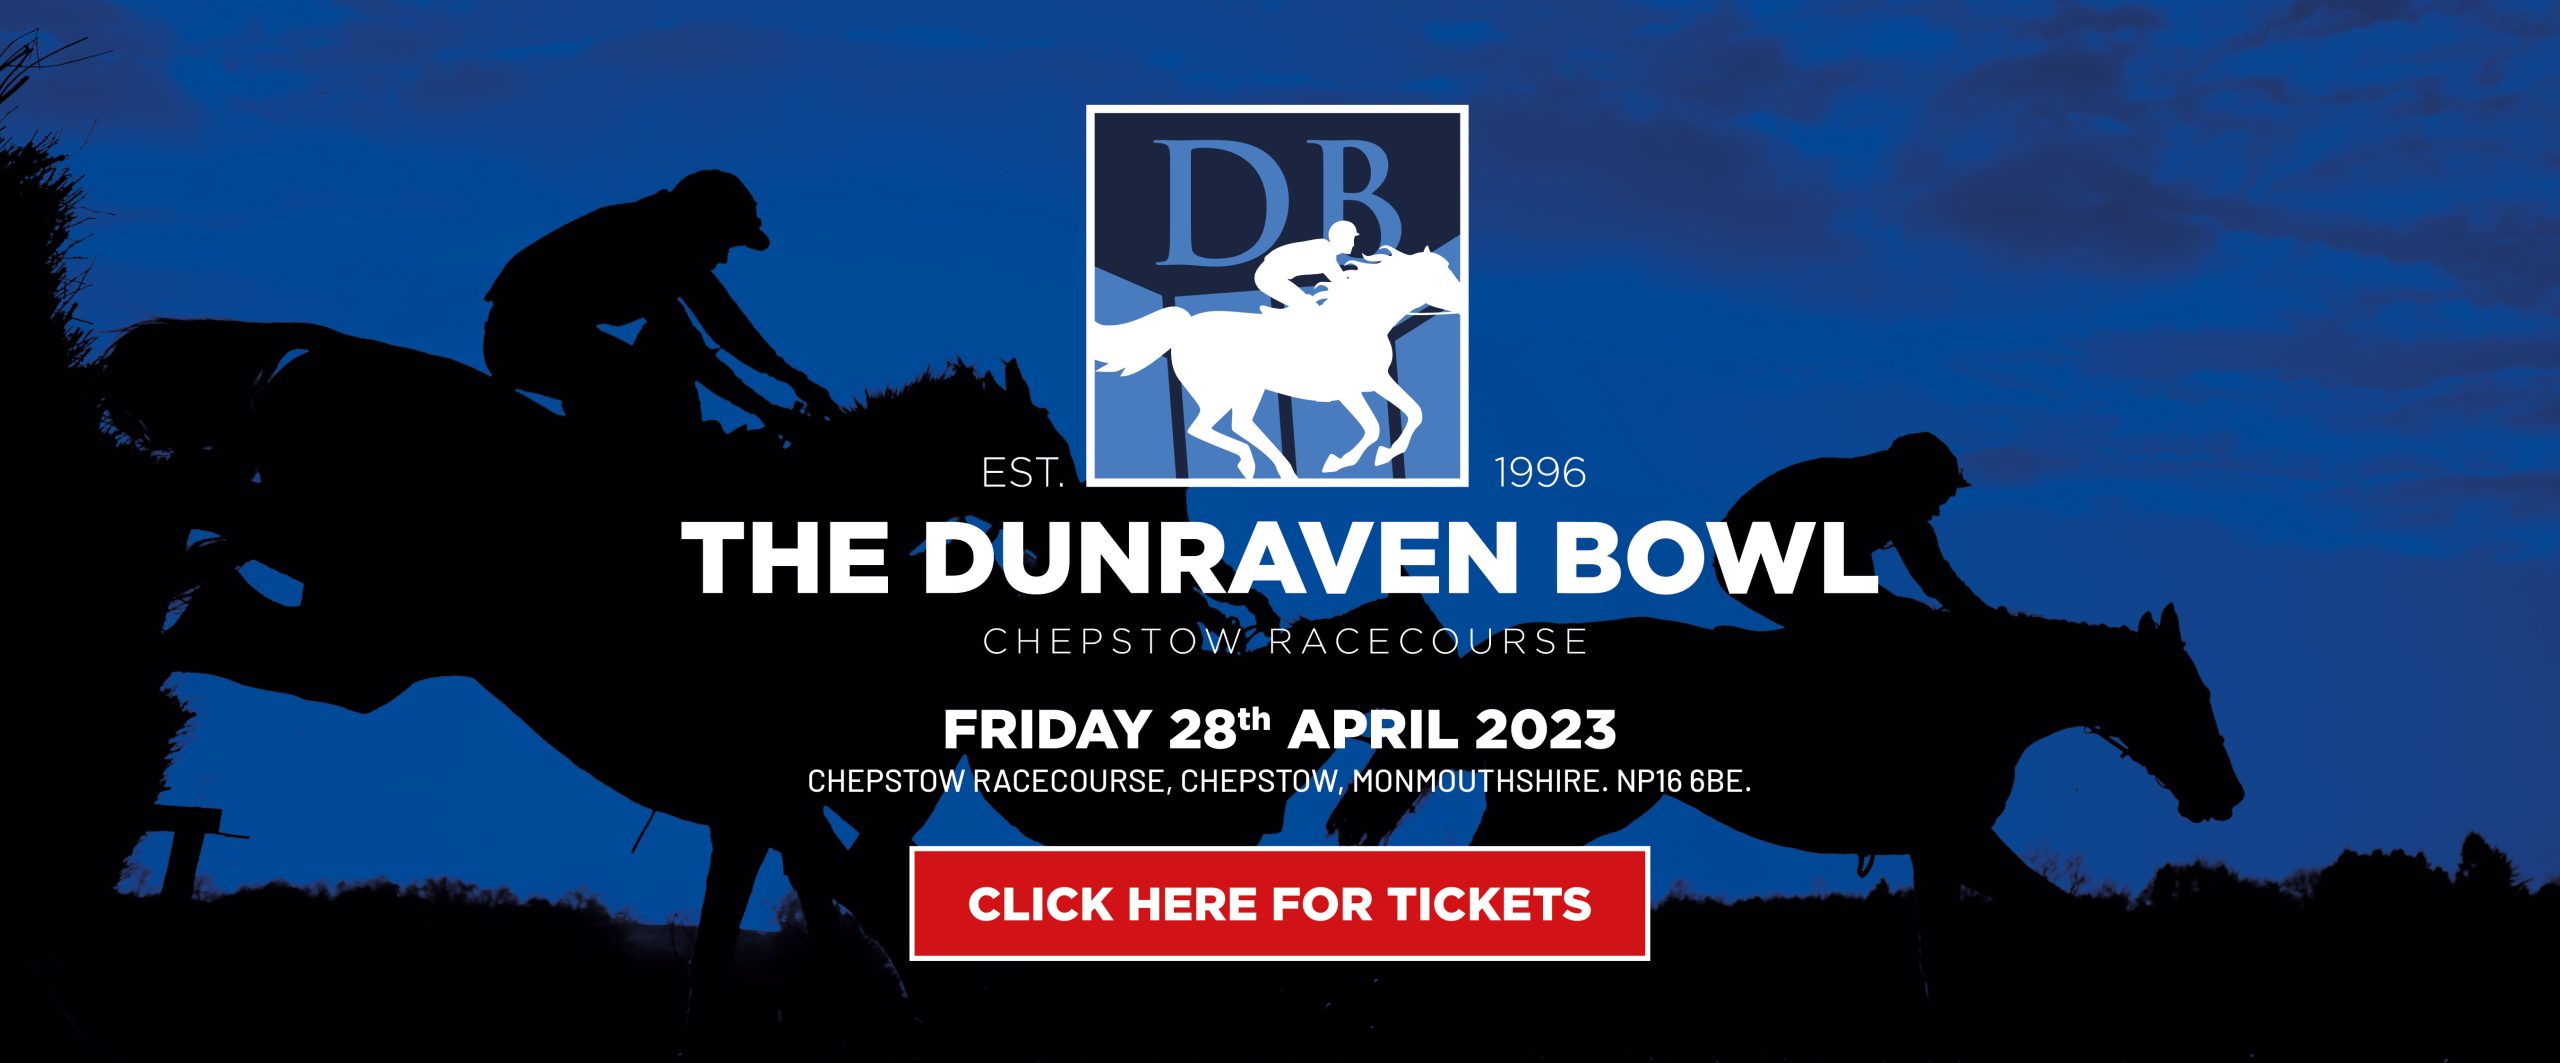 The Dunraven Bowl